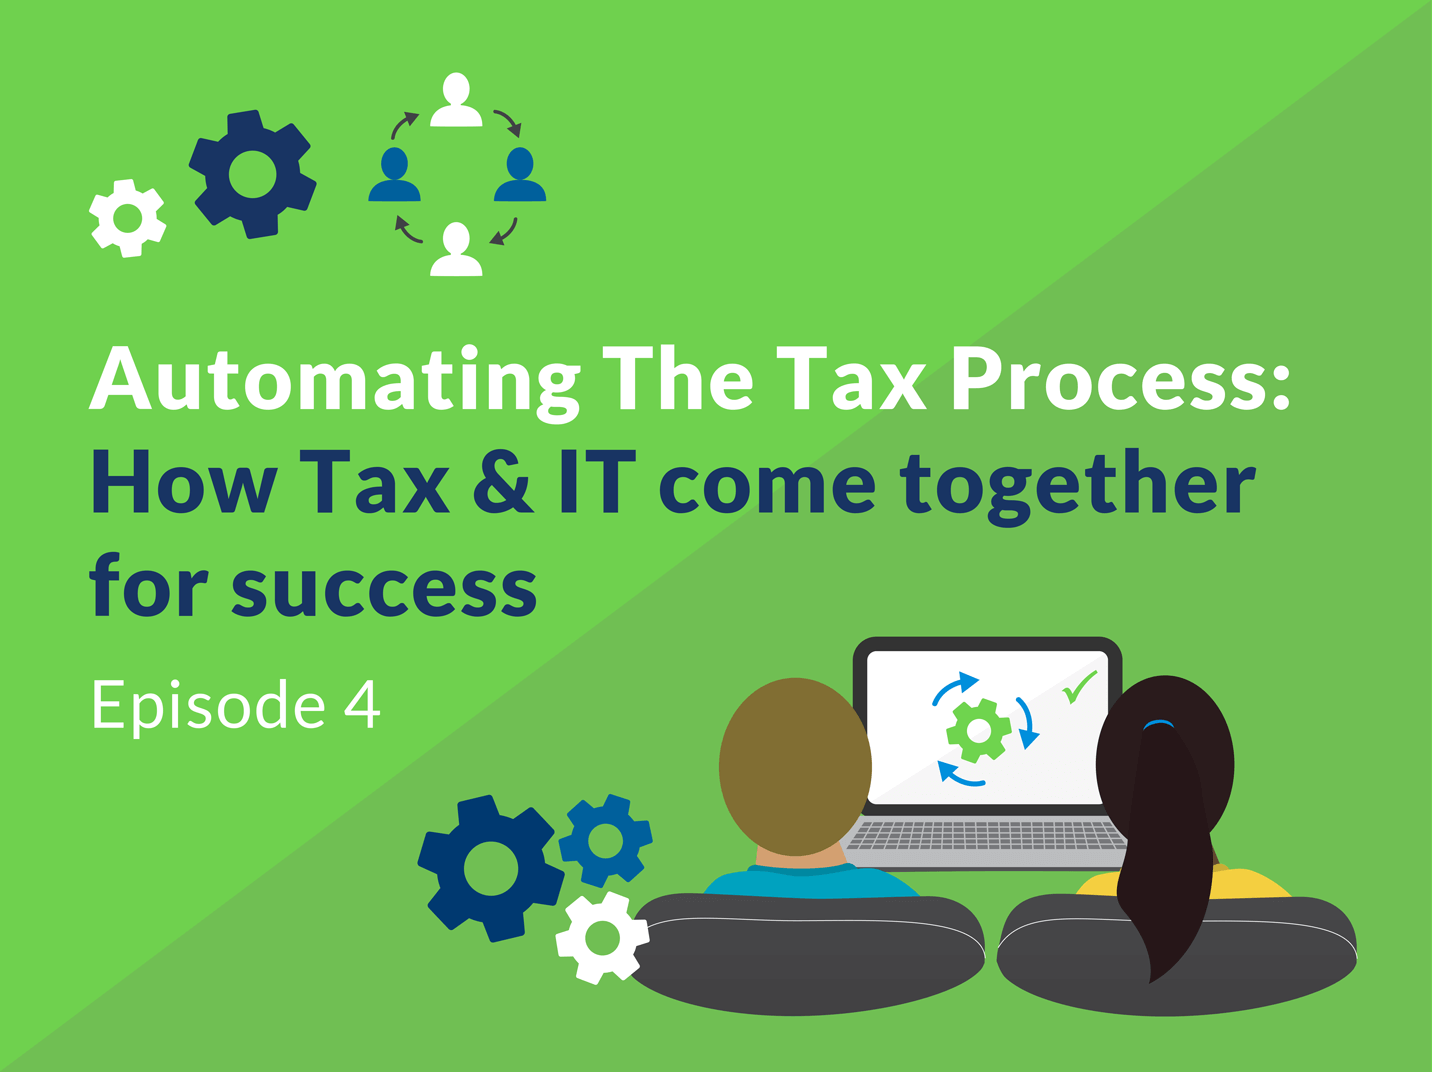 Automating Tax Processes: How Tax & IT Come Together for Success